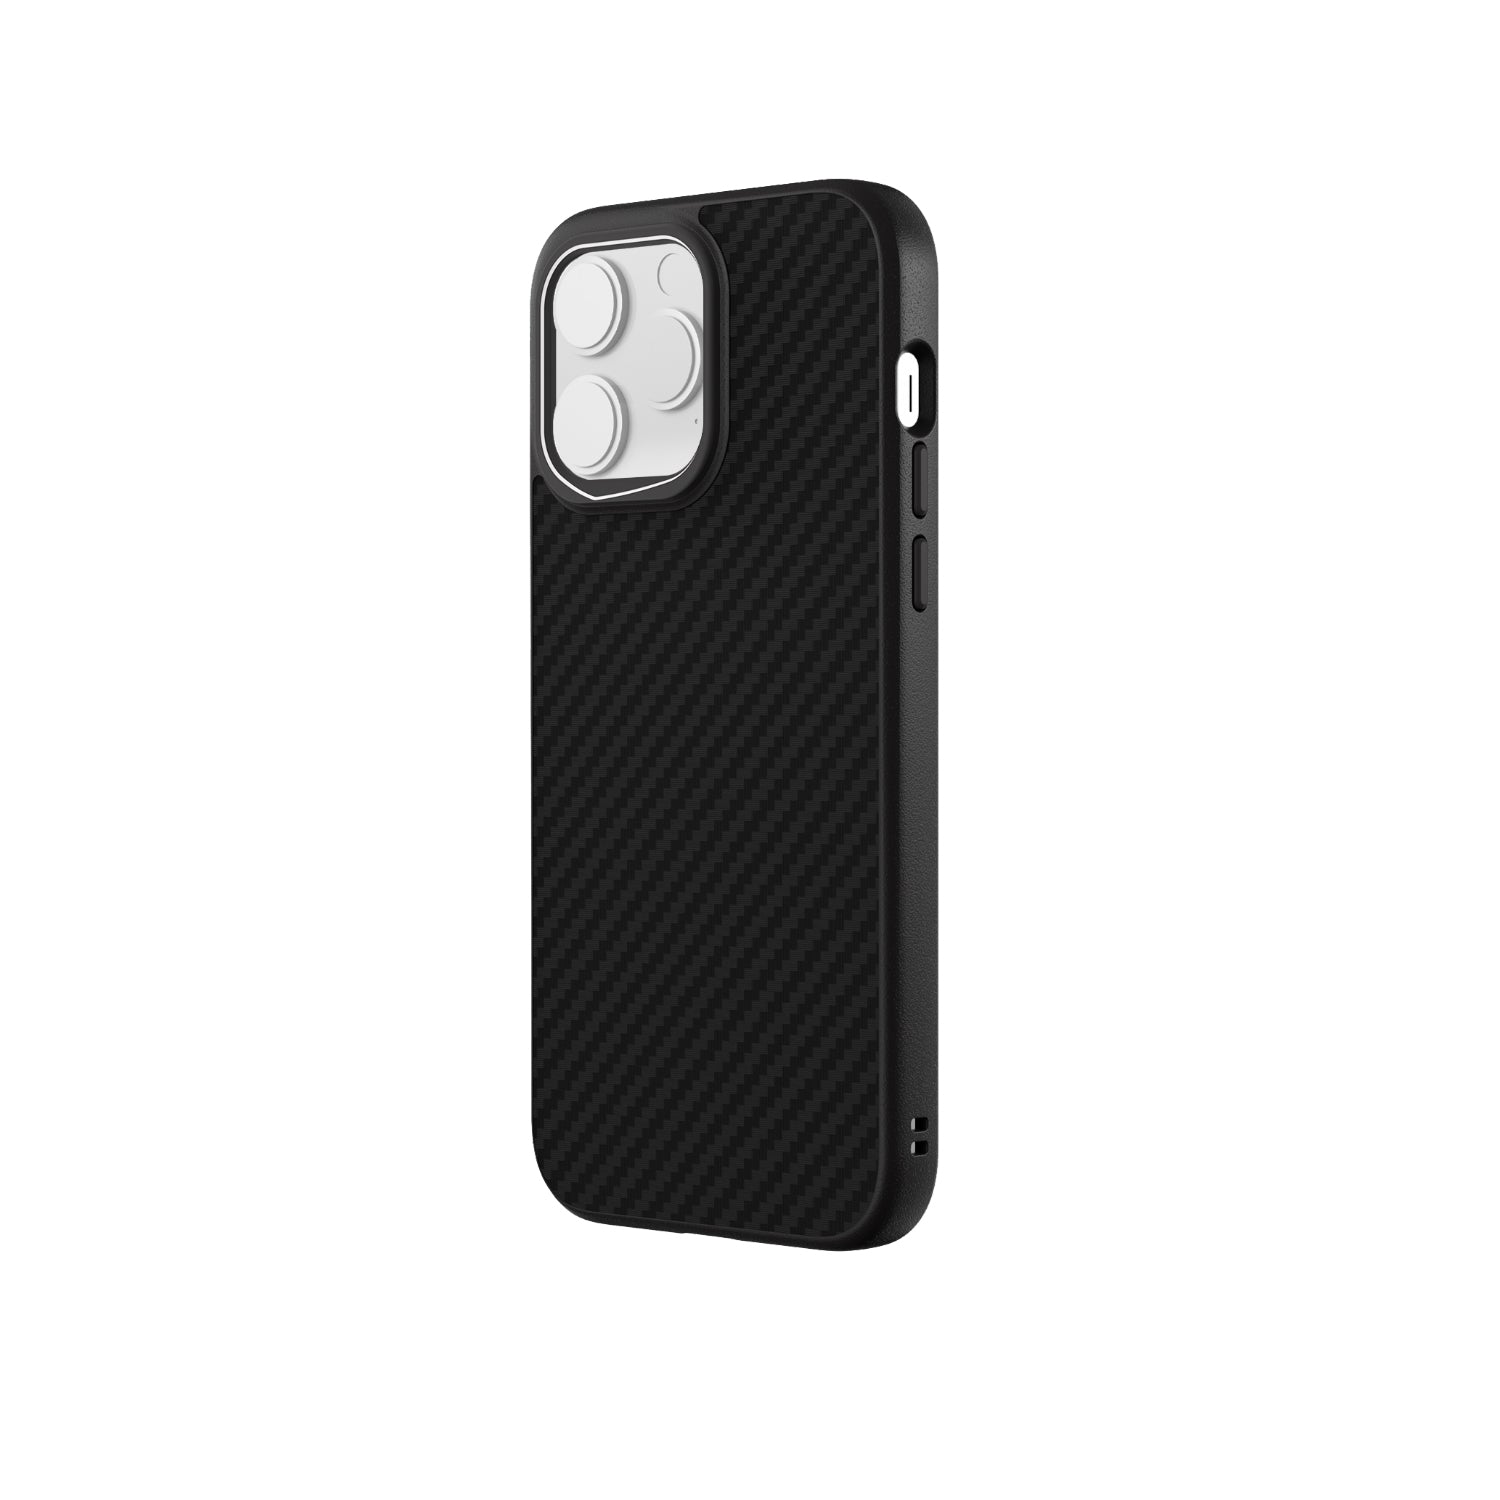 RhinoShield SolidSuit Case for iPhone 14 Series Mobile Phone Cases RhinoShield Carbon / Black iPhone 14 Pro 6.1" 